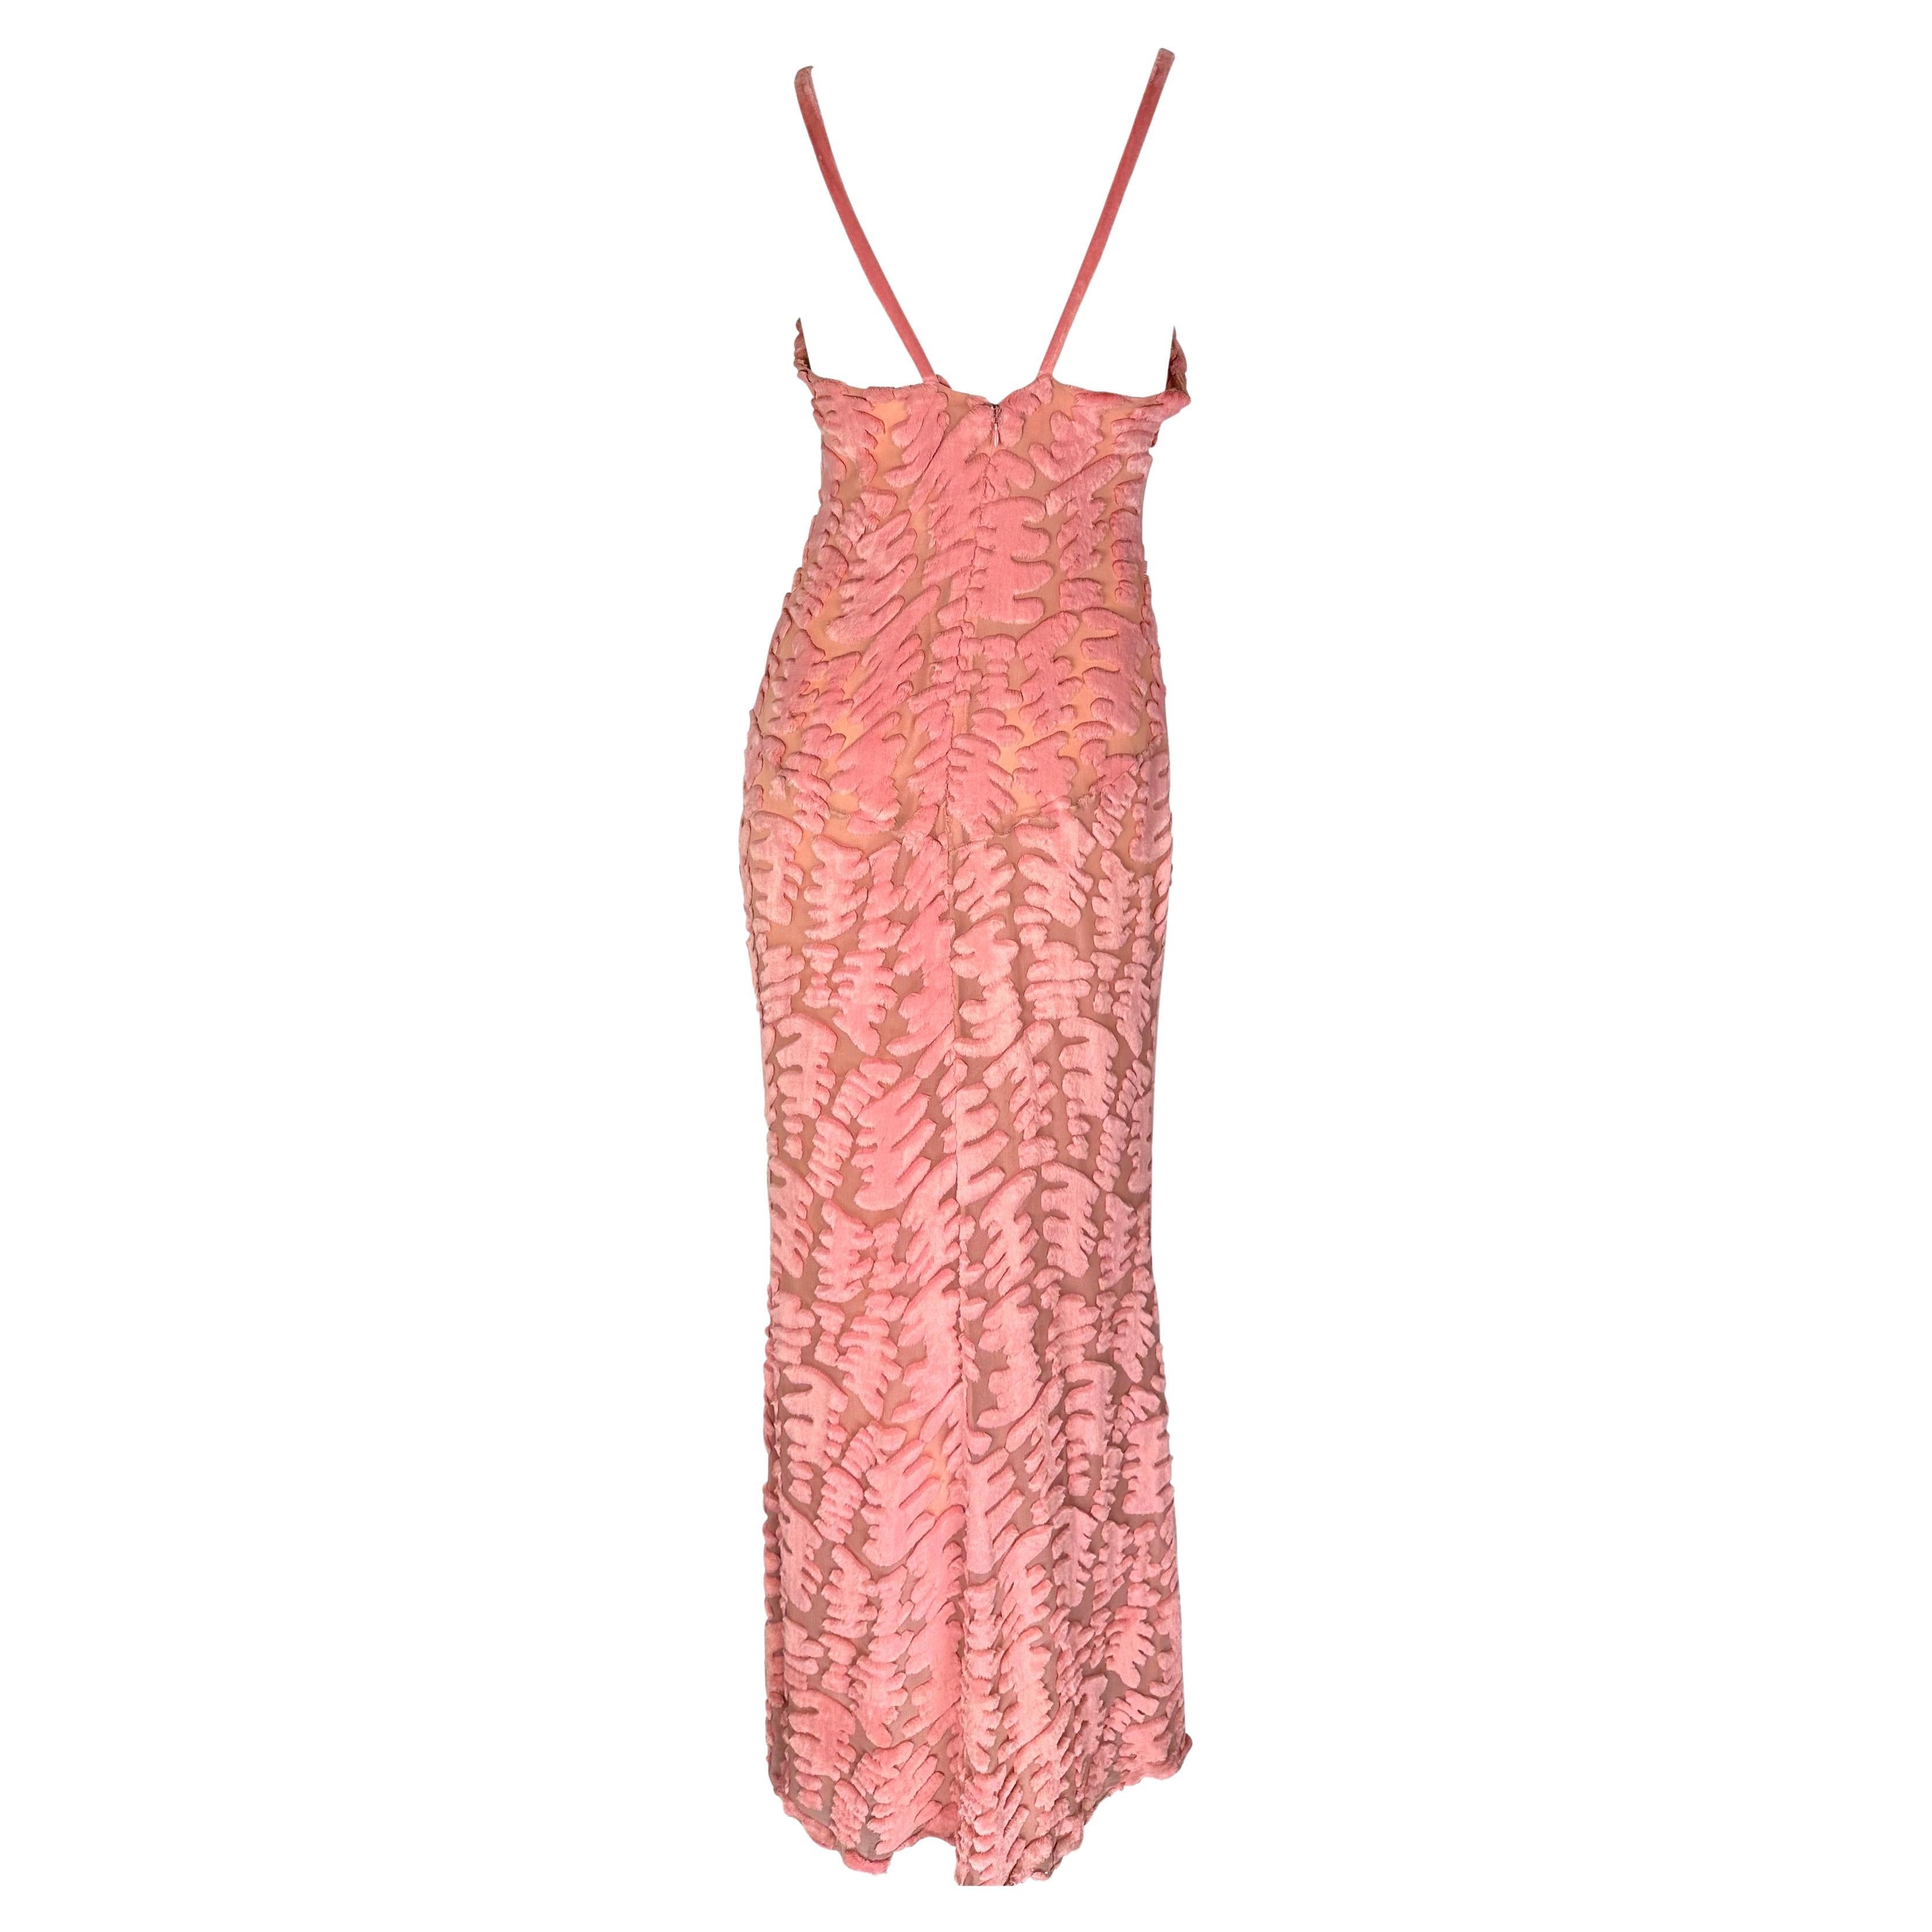 F/W 1997 Chloé by Karl Lagerfeld Pink Sheer Chiffon Abstract Chenille Gown For Sale 3